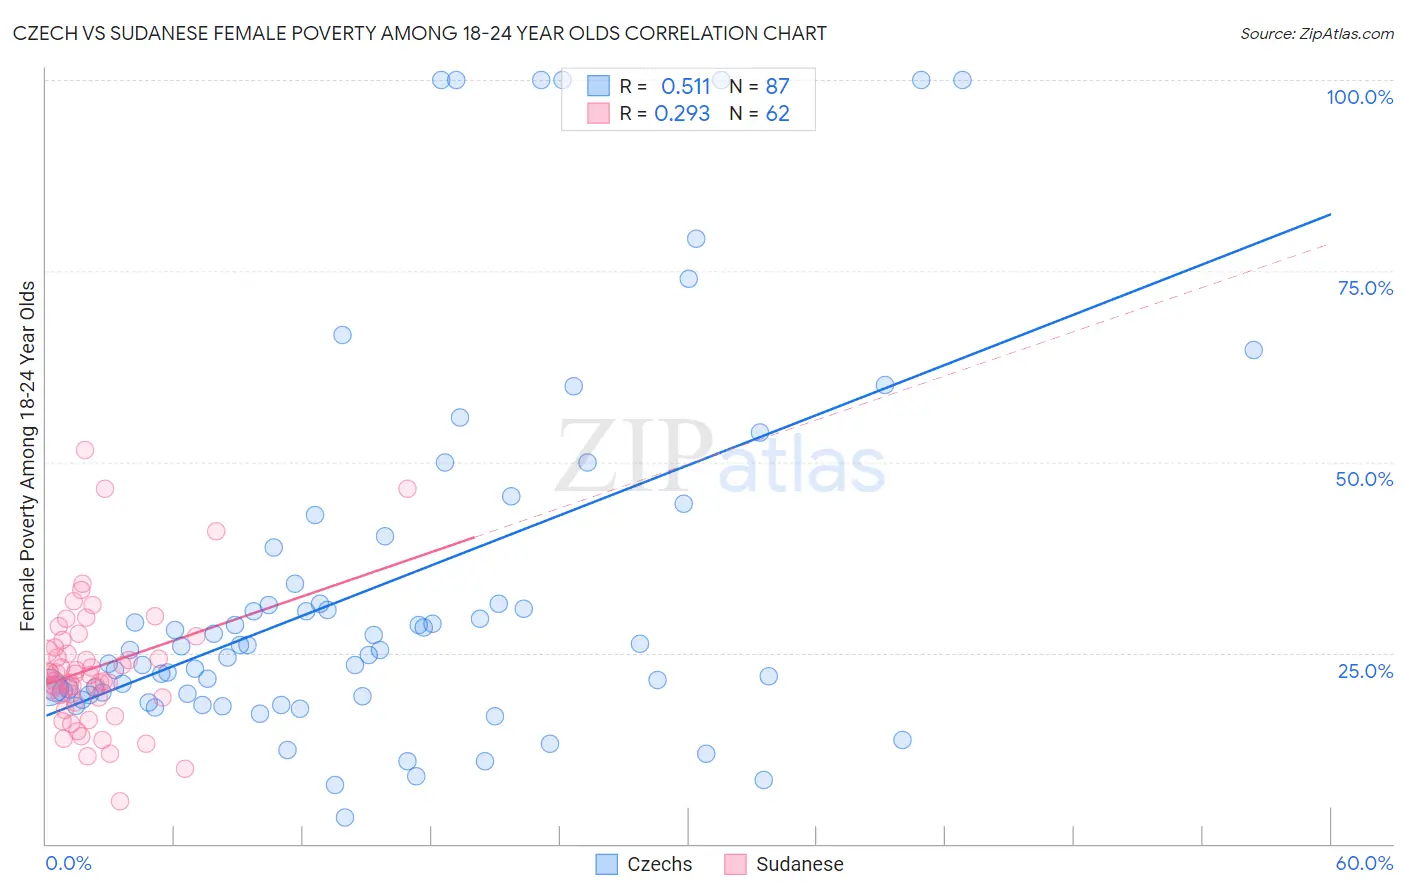 Czech vs Sudanese Female Poverty Among 18-24 Year Olds